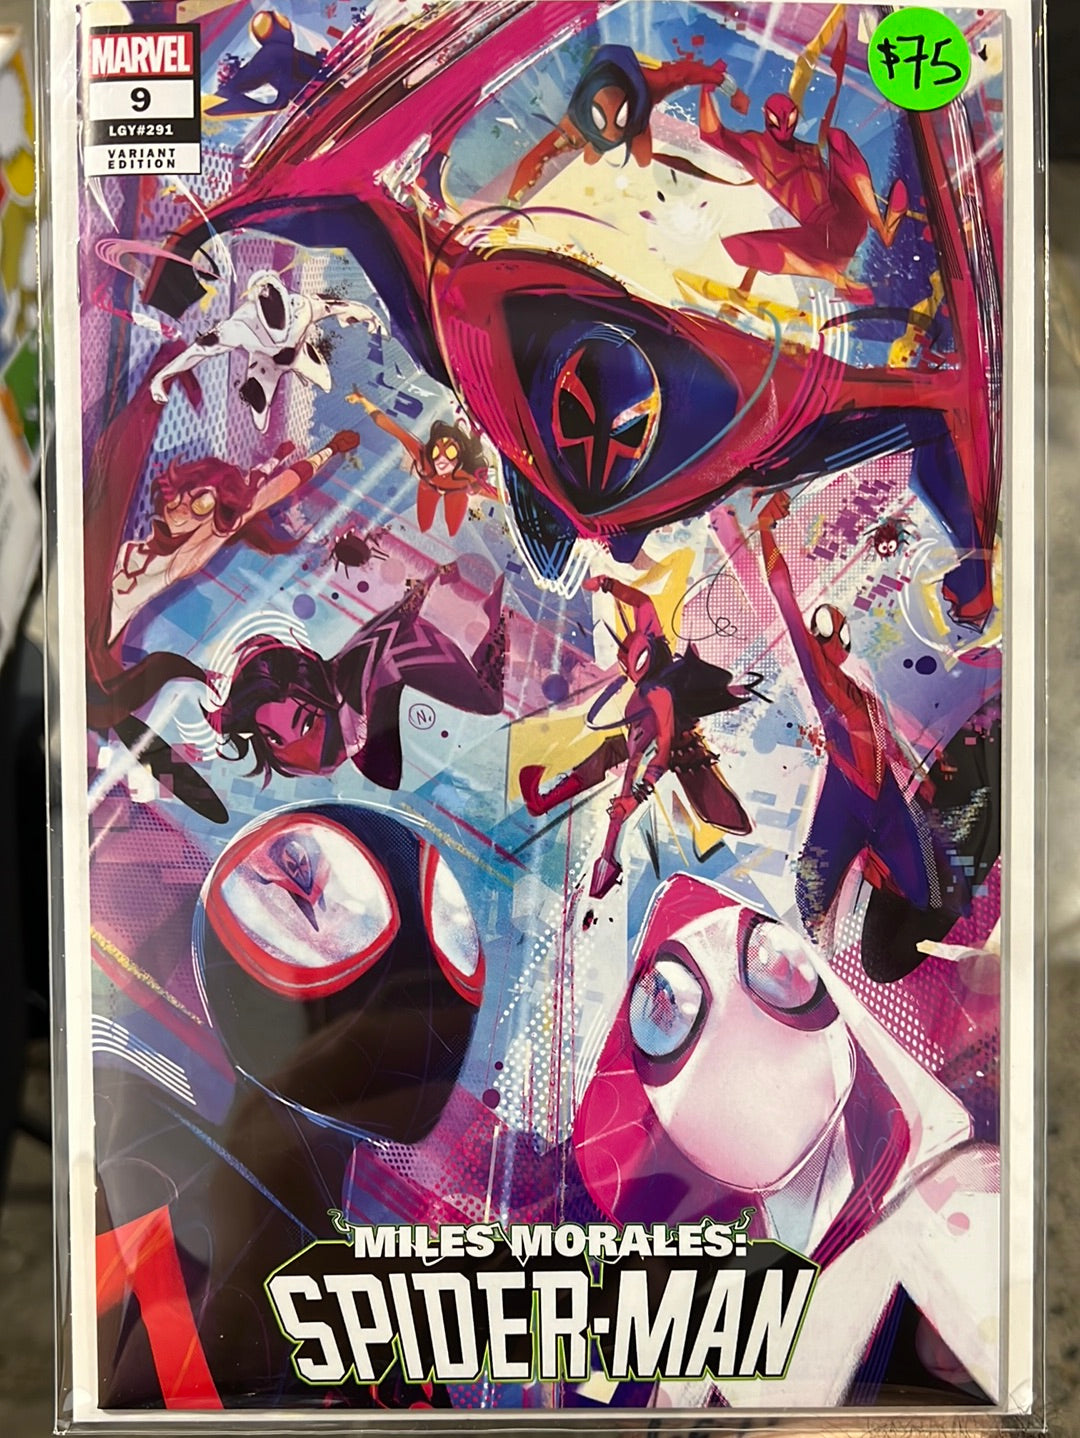 Miles Morales: Spider-Man #9 (Marvel, 2nd Series) Nicoletta Baldari variant Limited to 800 W/ Certificate of Authenticity